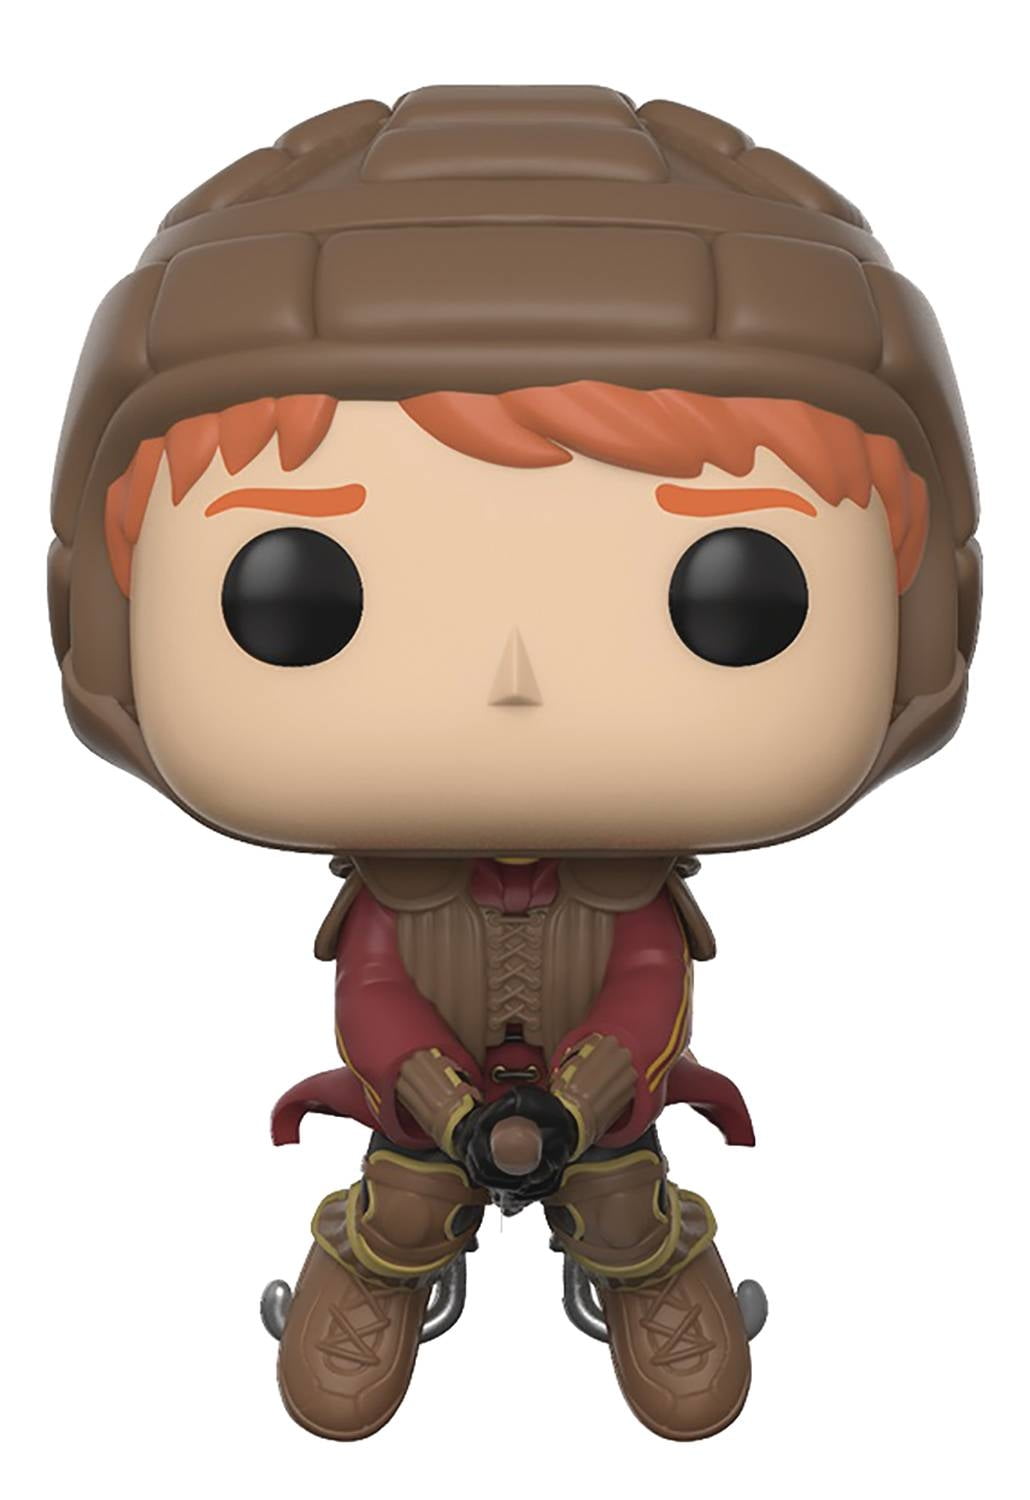 Funko Pop Movies Harry Potter S4 Ron Weasley With Scabbers for sale online 